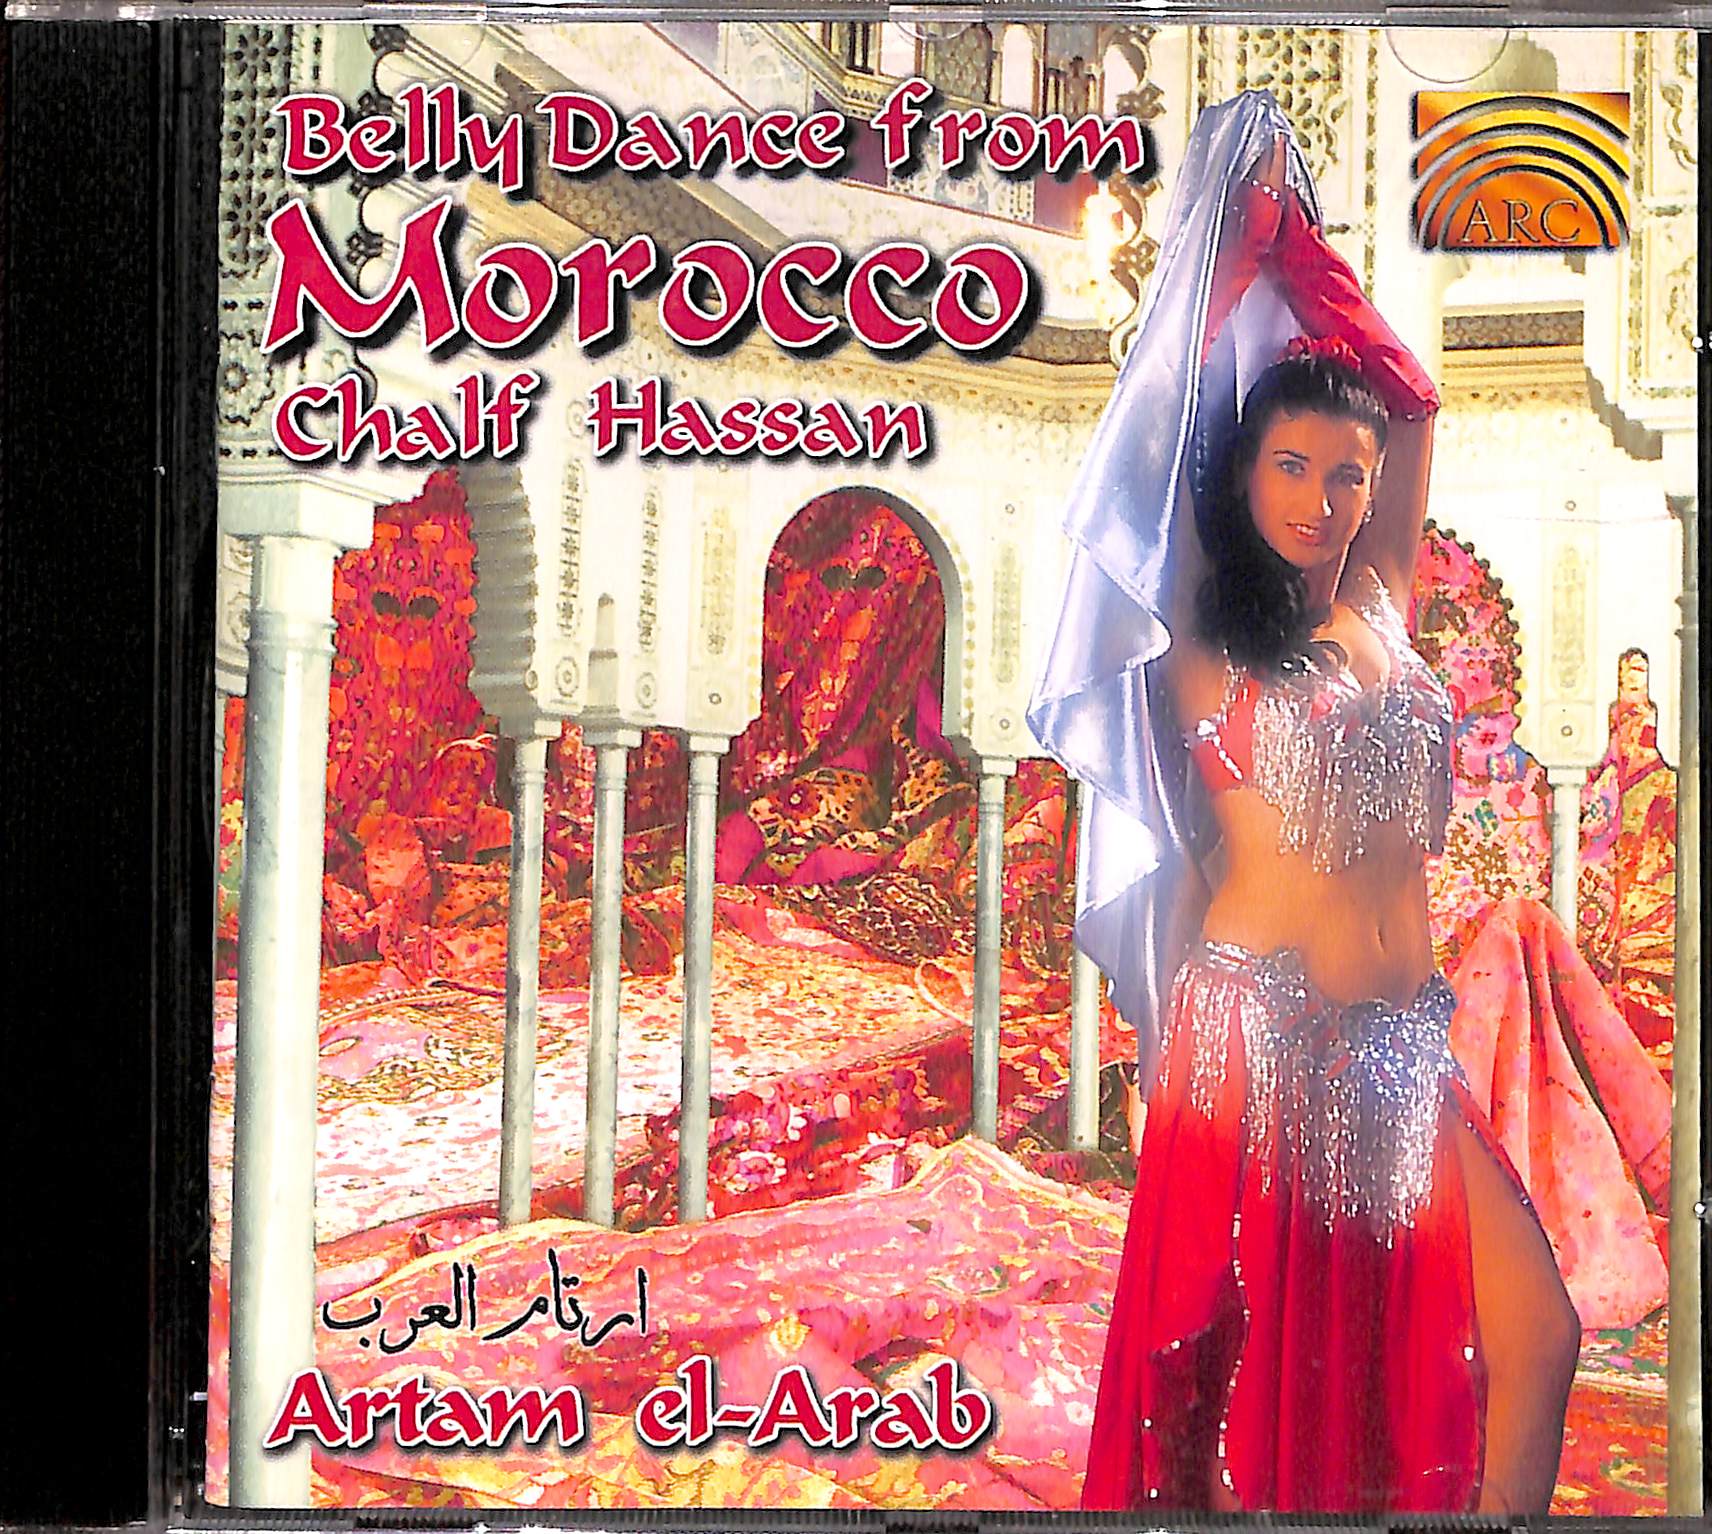 Belly Dance from Morocco by Chalf Hassan –